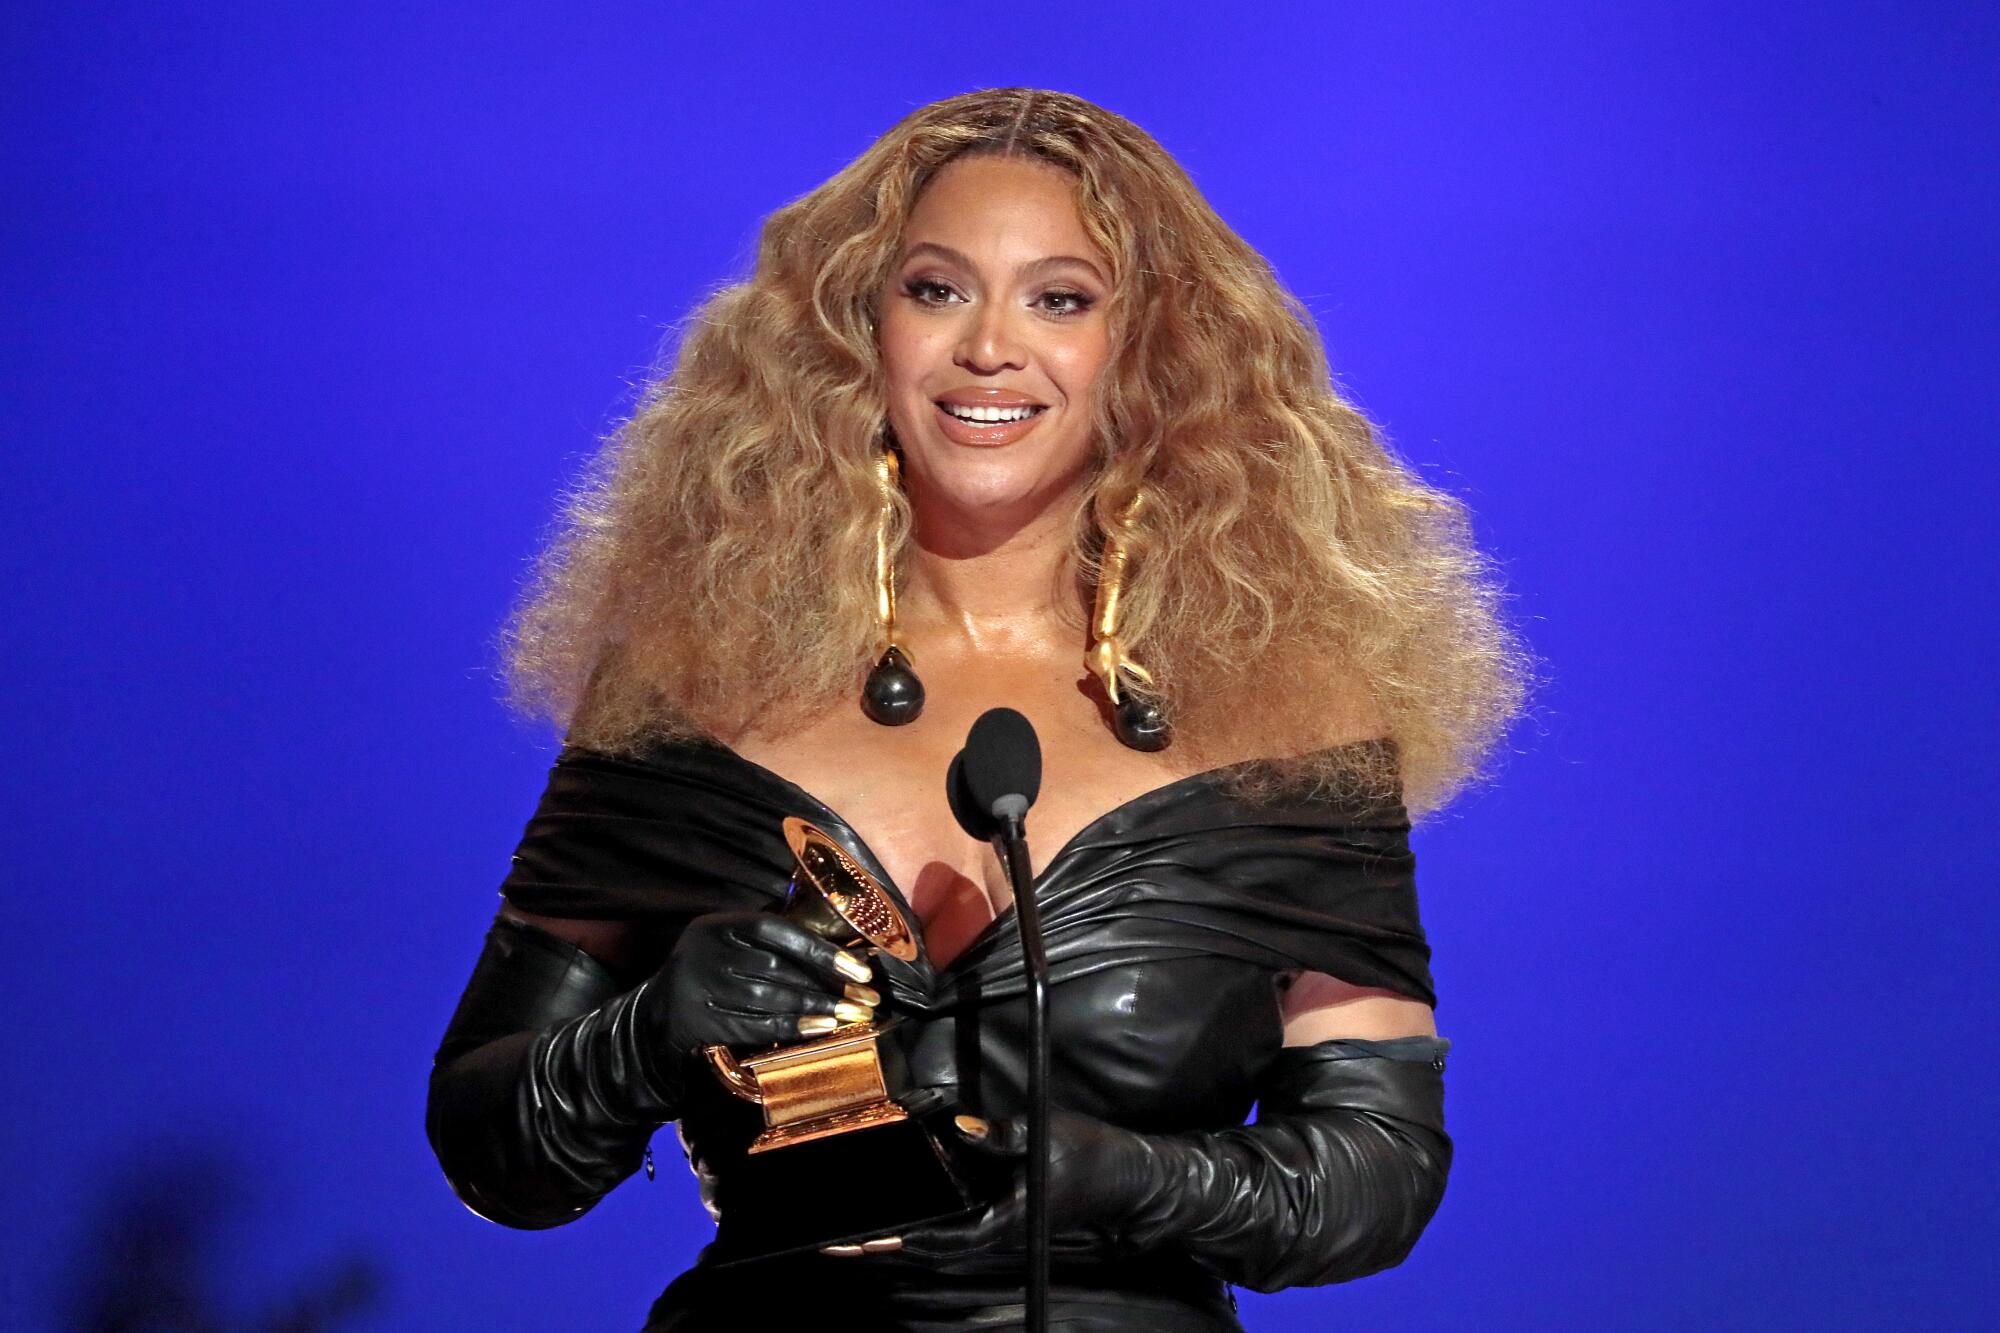 Beyoncé makes Grammy history with her win for best R&B performance.